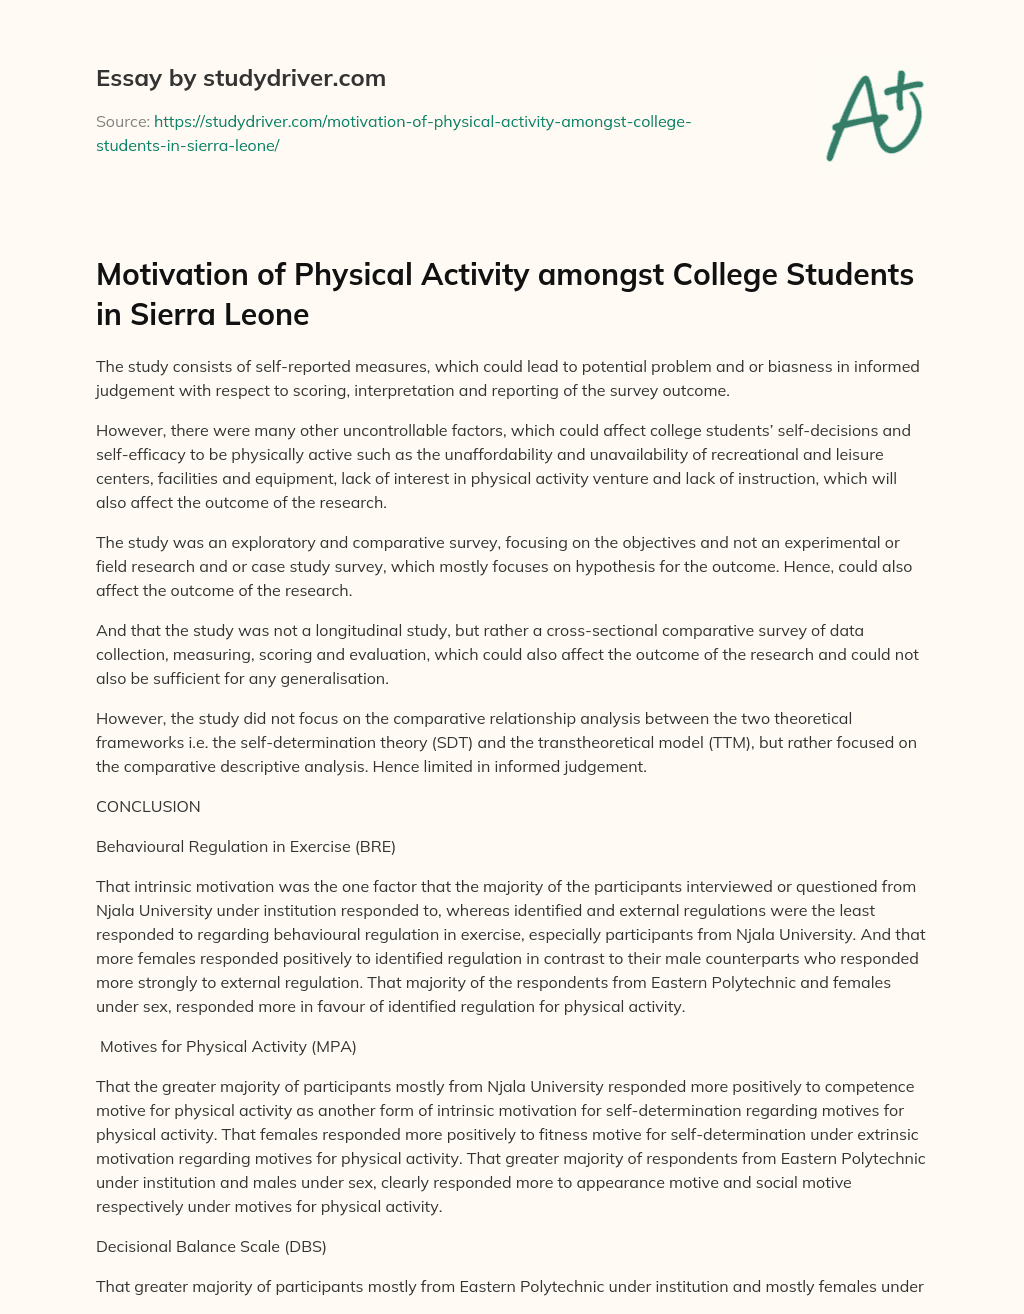 Motivation of Physical Activity Amongst College Students in Sierra Leone essay